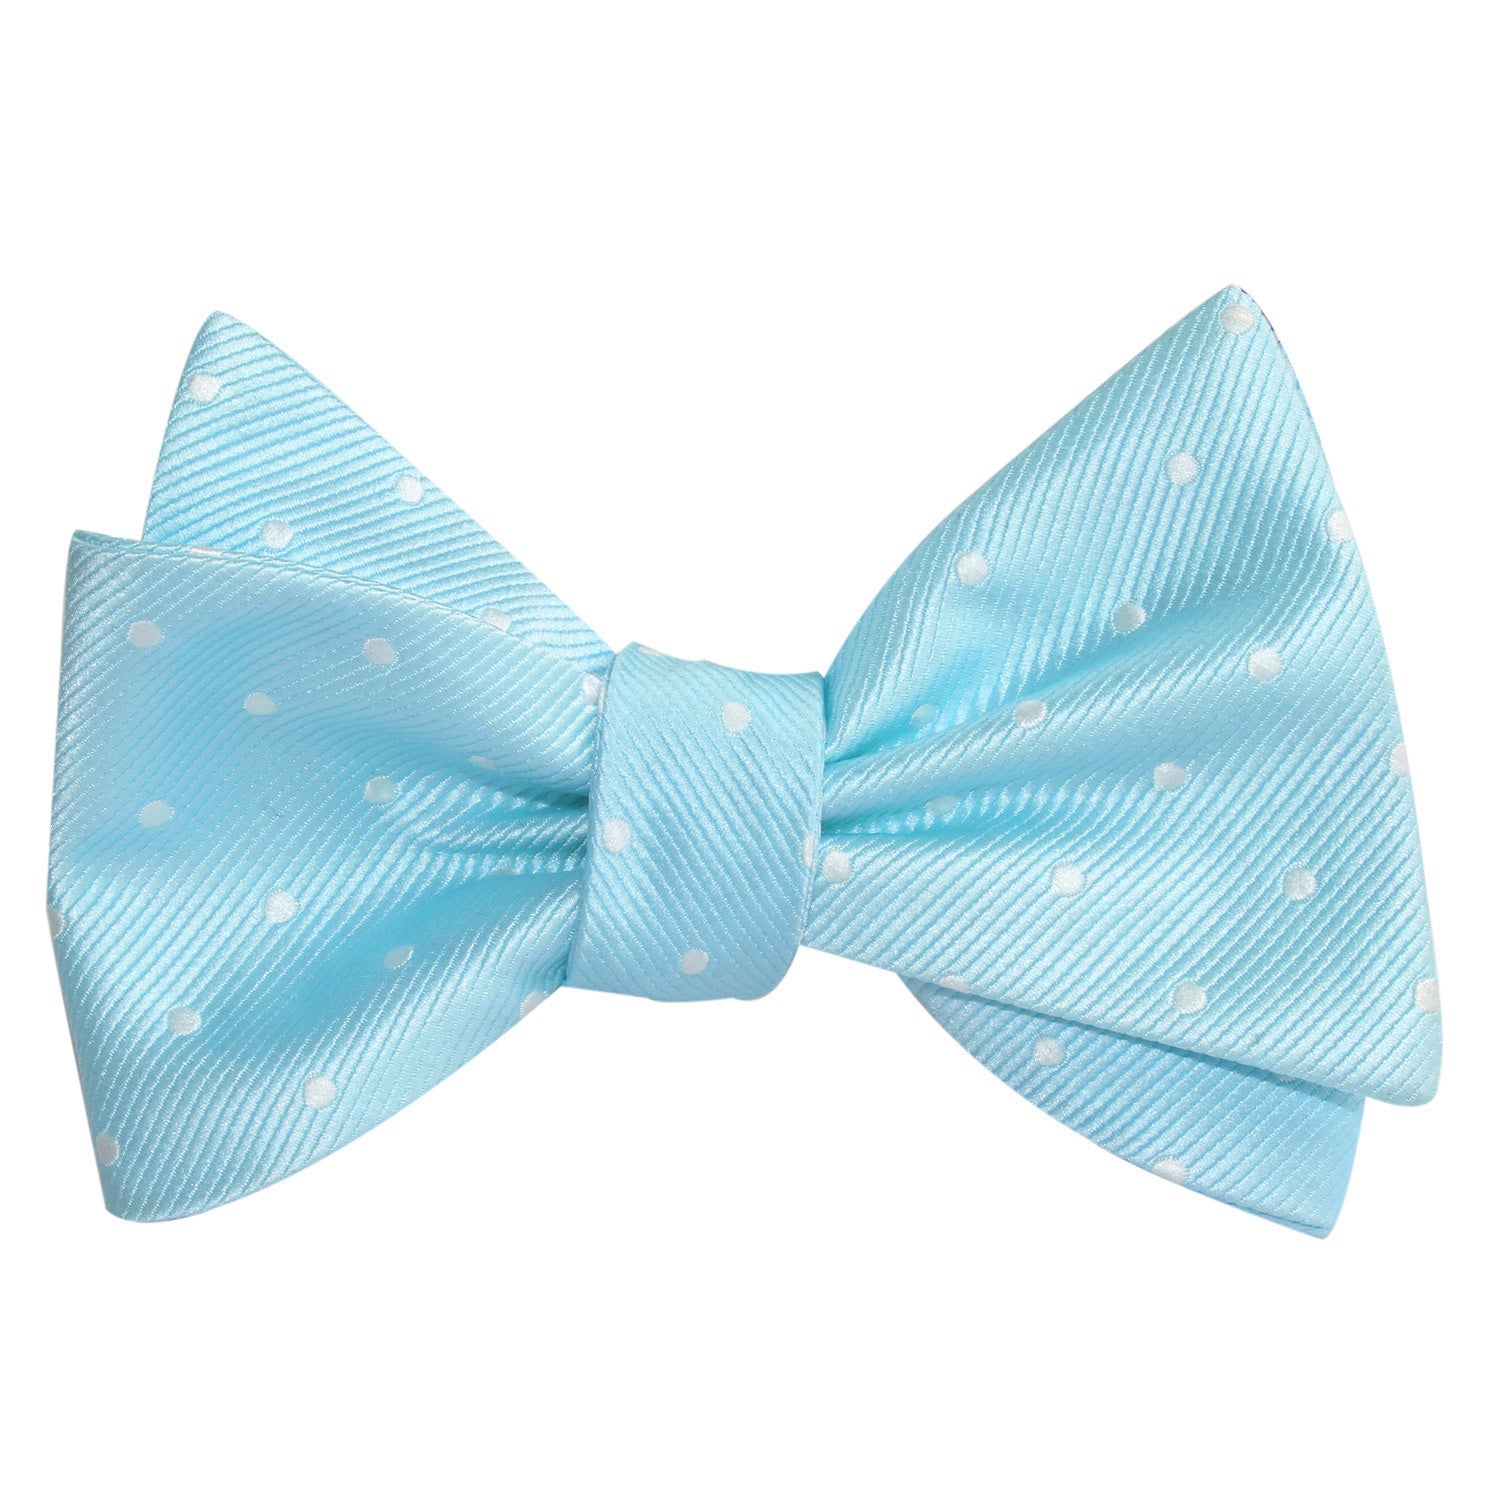 The OTAA Mint Blue with White Polka Dots Self Tie Bow Tie 2